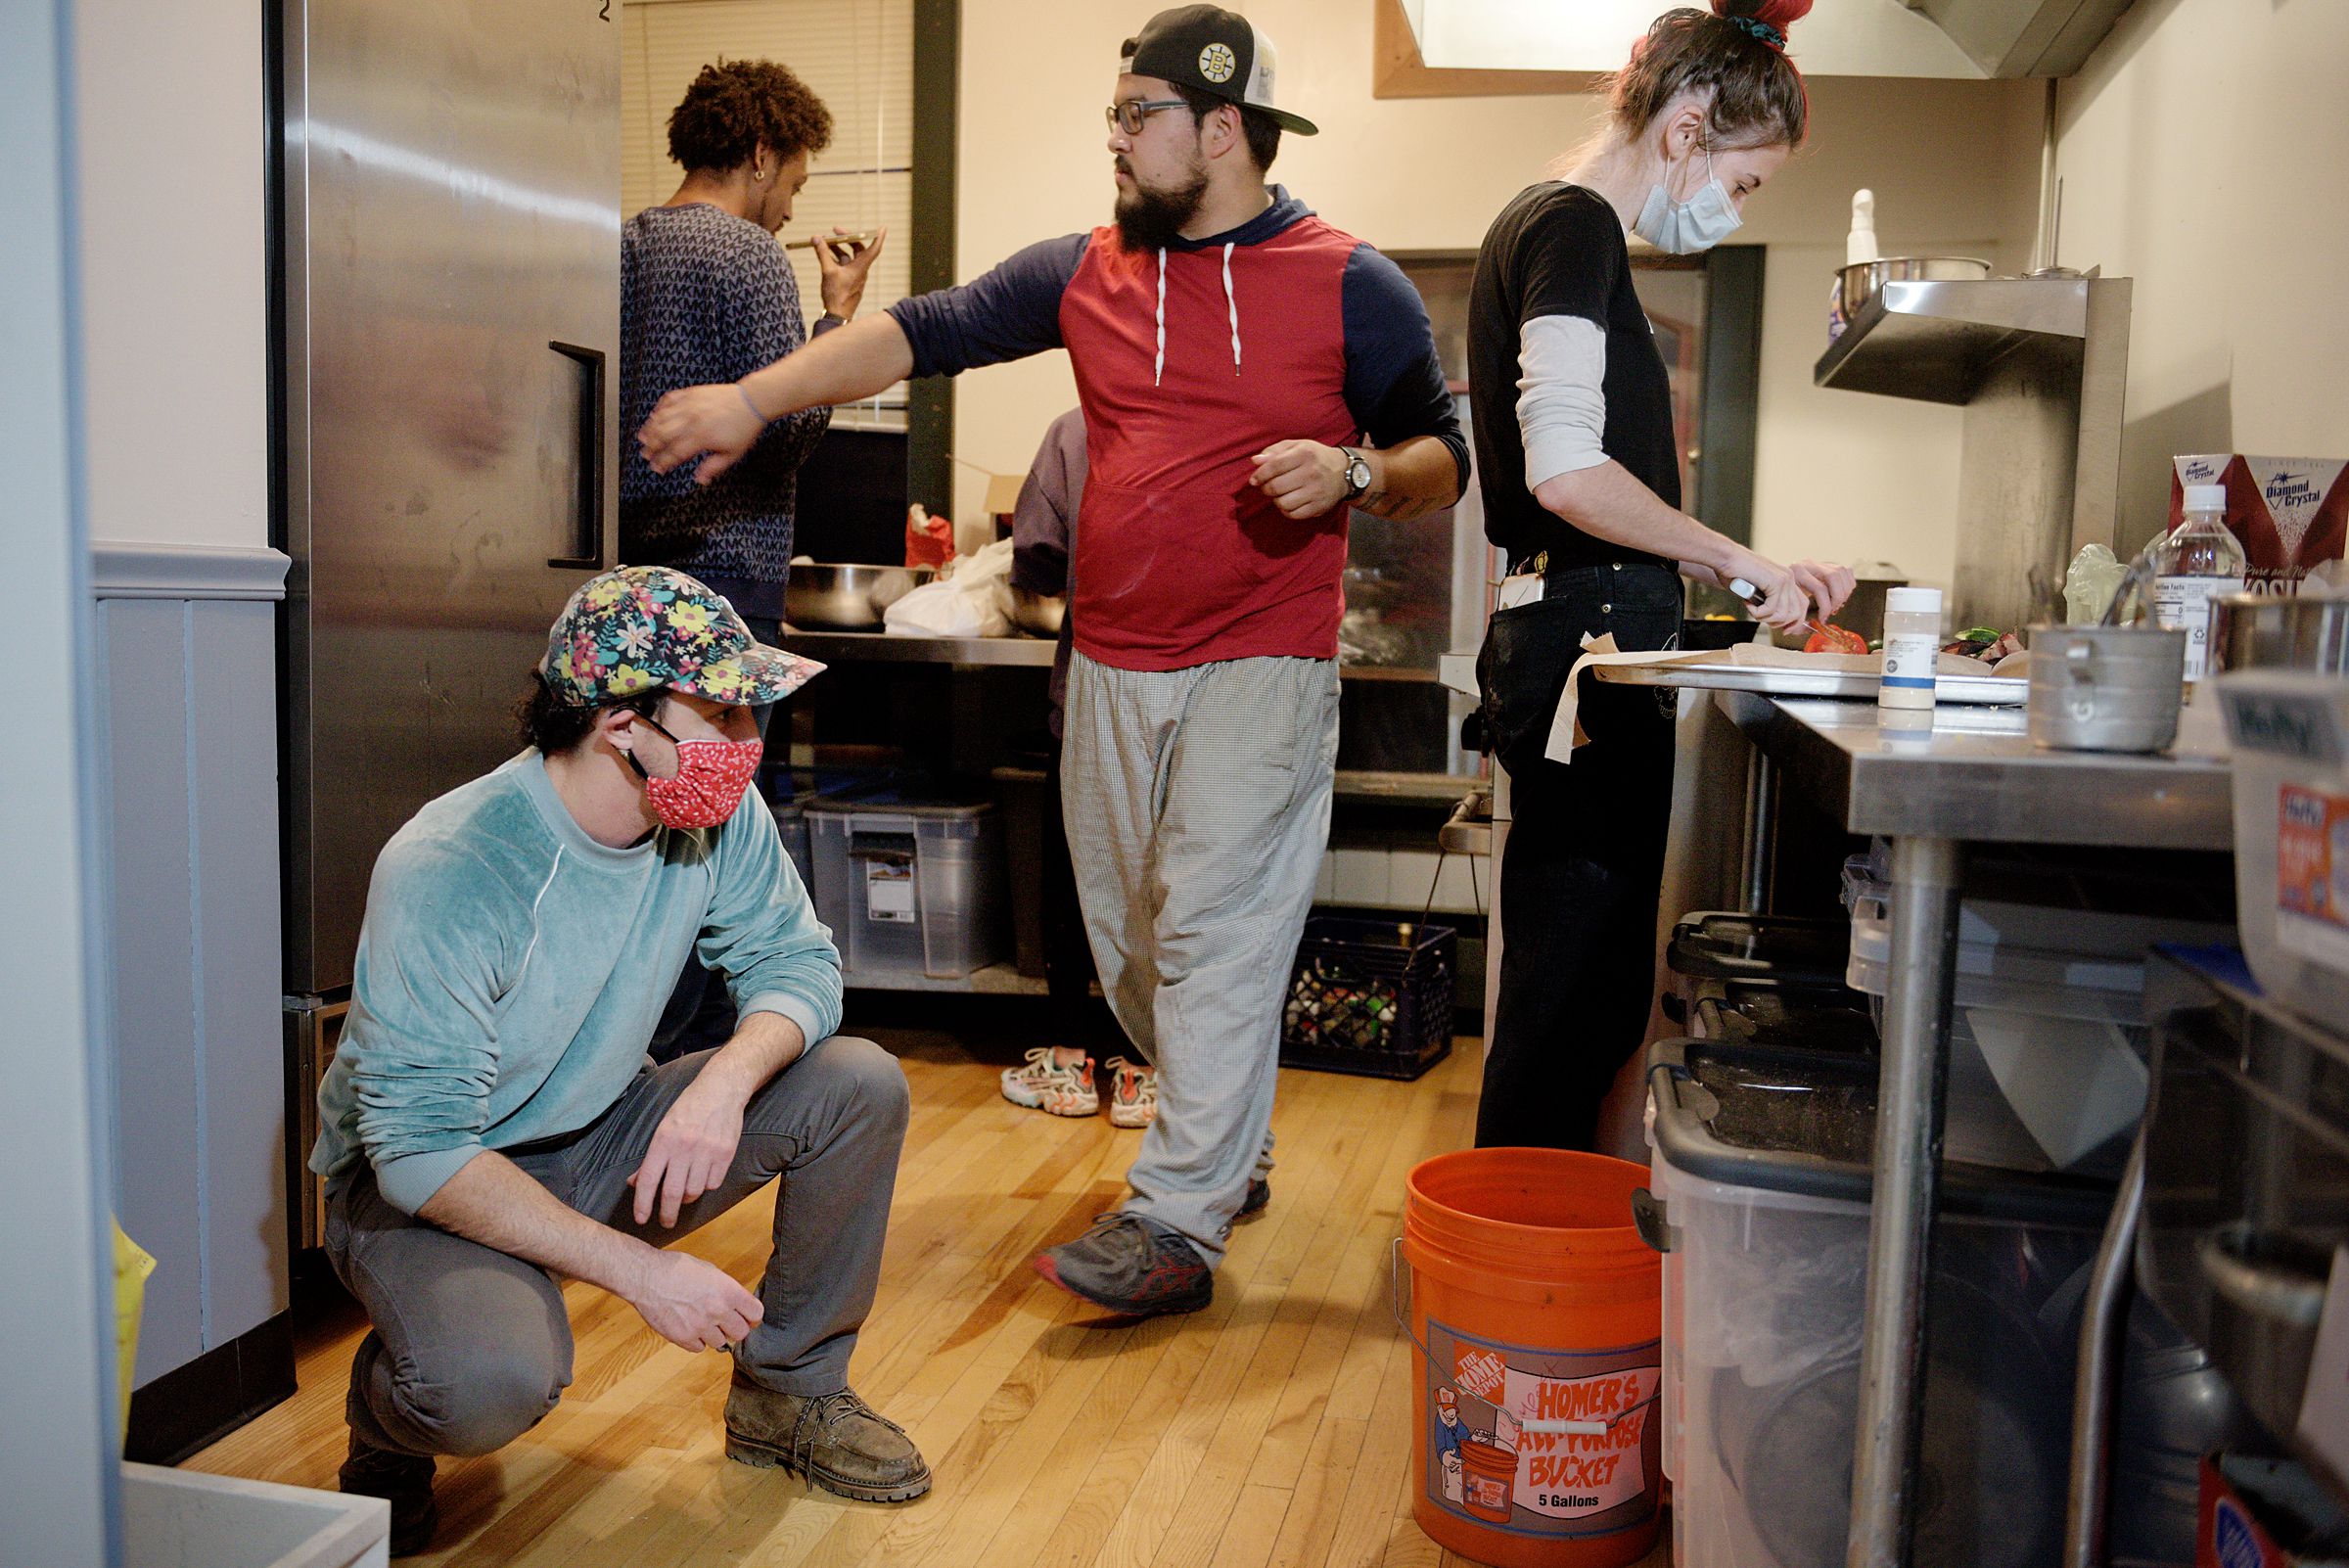 Jesse Plotsky, co-owner of Babes Bar, left, looks for a cake pan as Tre Groves, top left, Tristan Brown, middle, and Grace Dorman, right, prepare a meal at the Arnold Block test kitchen in Bethel, Vt., Wednesday, Oct. 8, 2020. The group is developing a menu for a food trailer they are preparing to open with Babes as the parent business. “I am not remarkable in any particular way,” said Plotsky about his activism. “I see my role as the holder of space. I’m basically here to do what is asked of me, knowing the power that I hold as a business owner and as a white person.” (Valley News - James M. Patterson) Copyright Valley News. May not be reprinted or used online without permission. Send requests to permission@vnews.com.